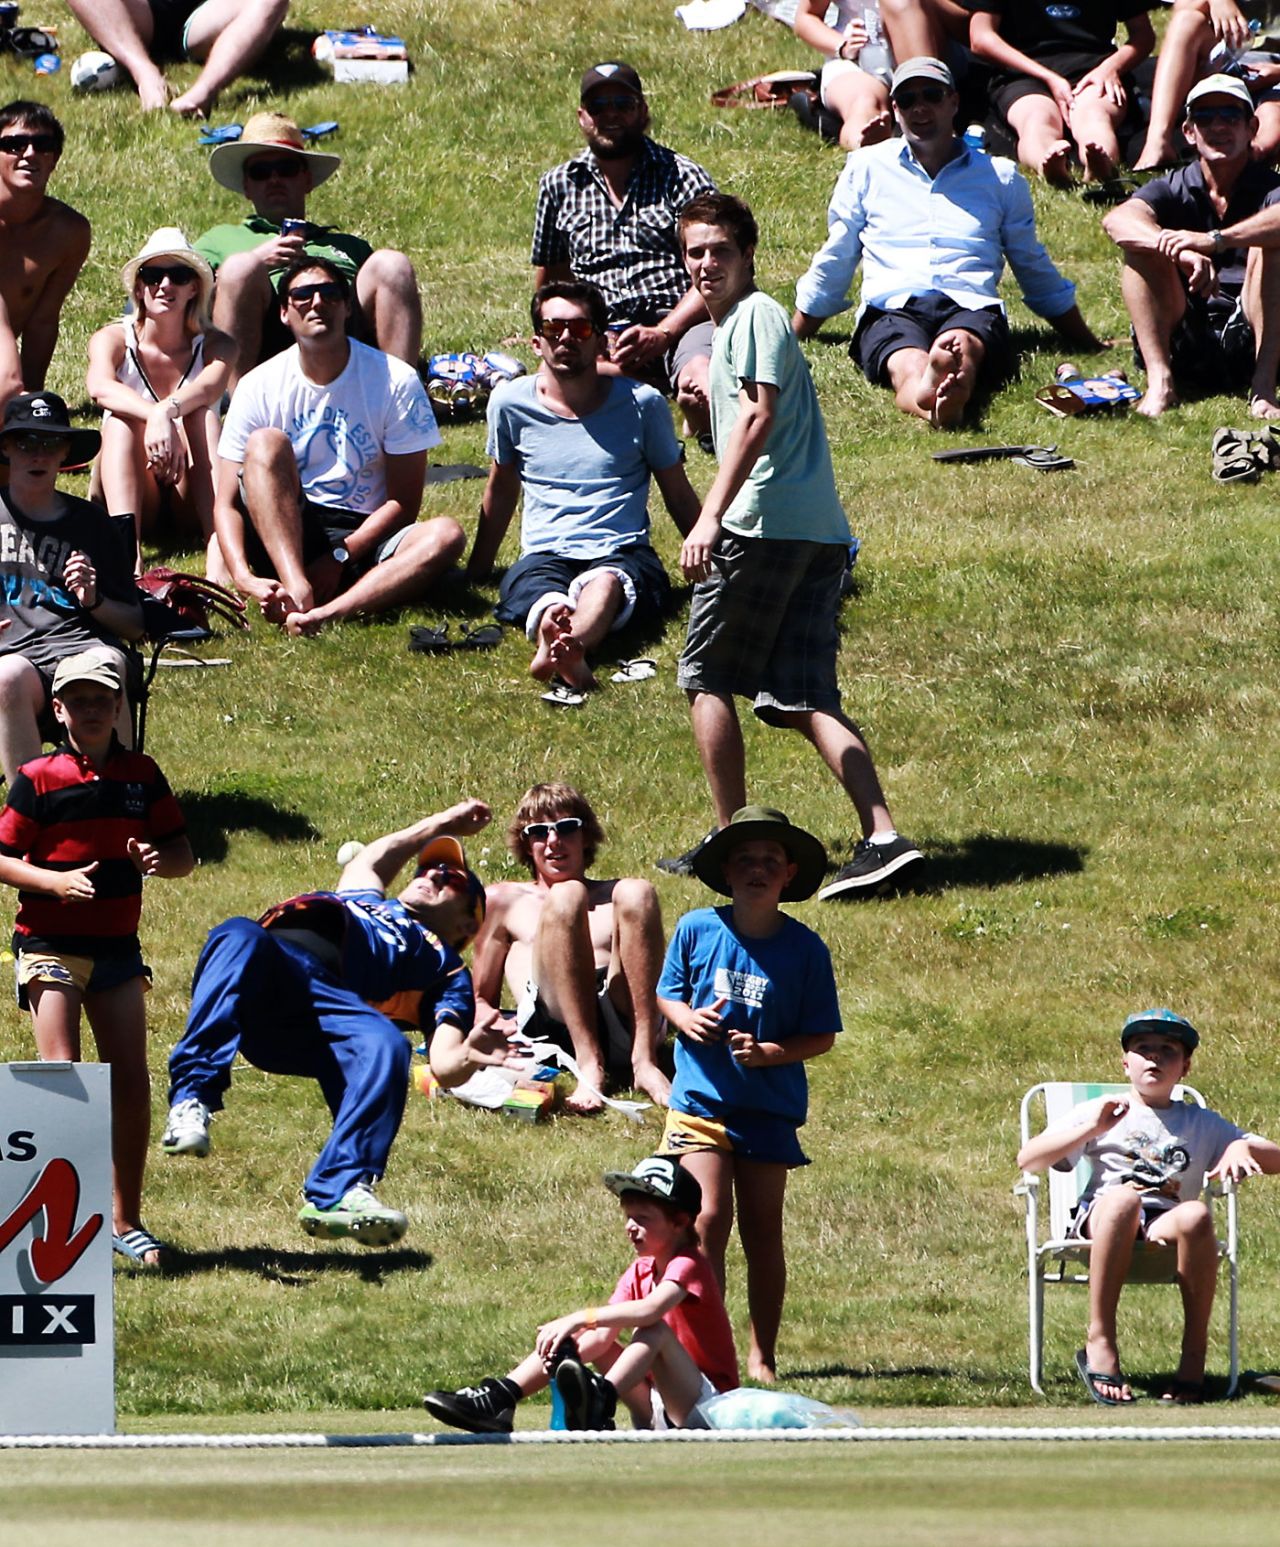 Nathan McCullum drops a catch on the boundary, Otago v Wellington, HRV Cup, Queenstown, December 31, 2011